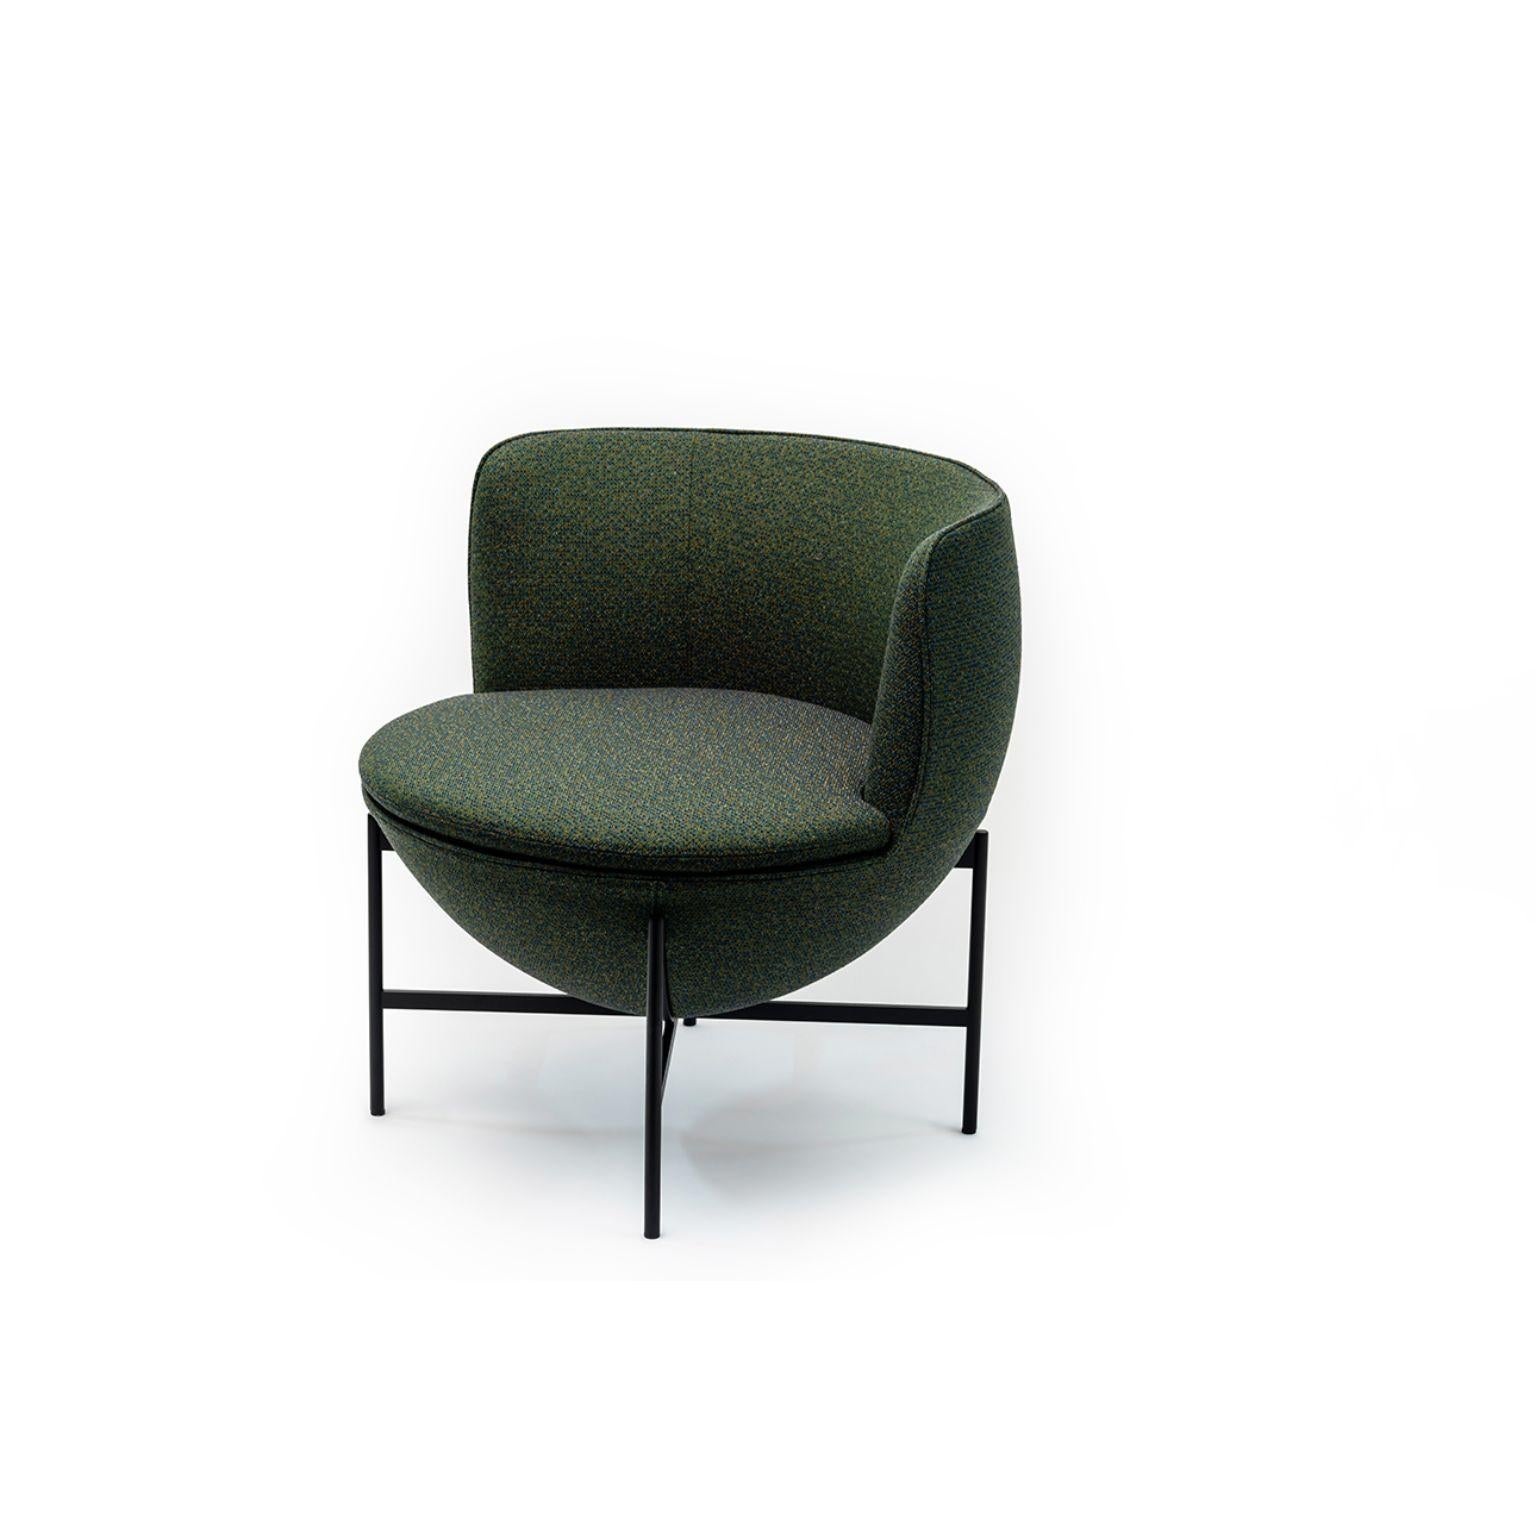 Calice armchair four-leg base by Patrick Norguet
Materials: Upholstery: Fabric or leather
 Structure: Black powder-coated metal or matte champagne and black chrome 
Dimensions: W 72.8 x D70.7 x H 71.6 cm
 HS 43.7 cm

The Calice armchair owes